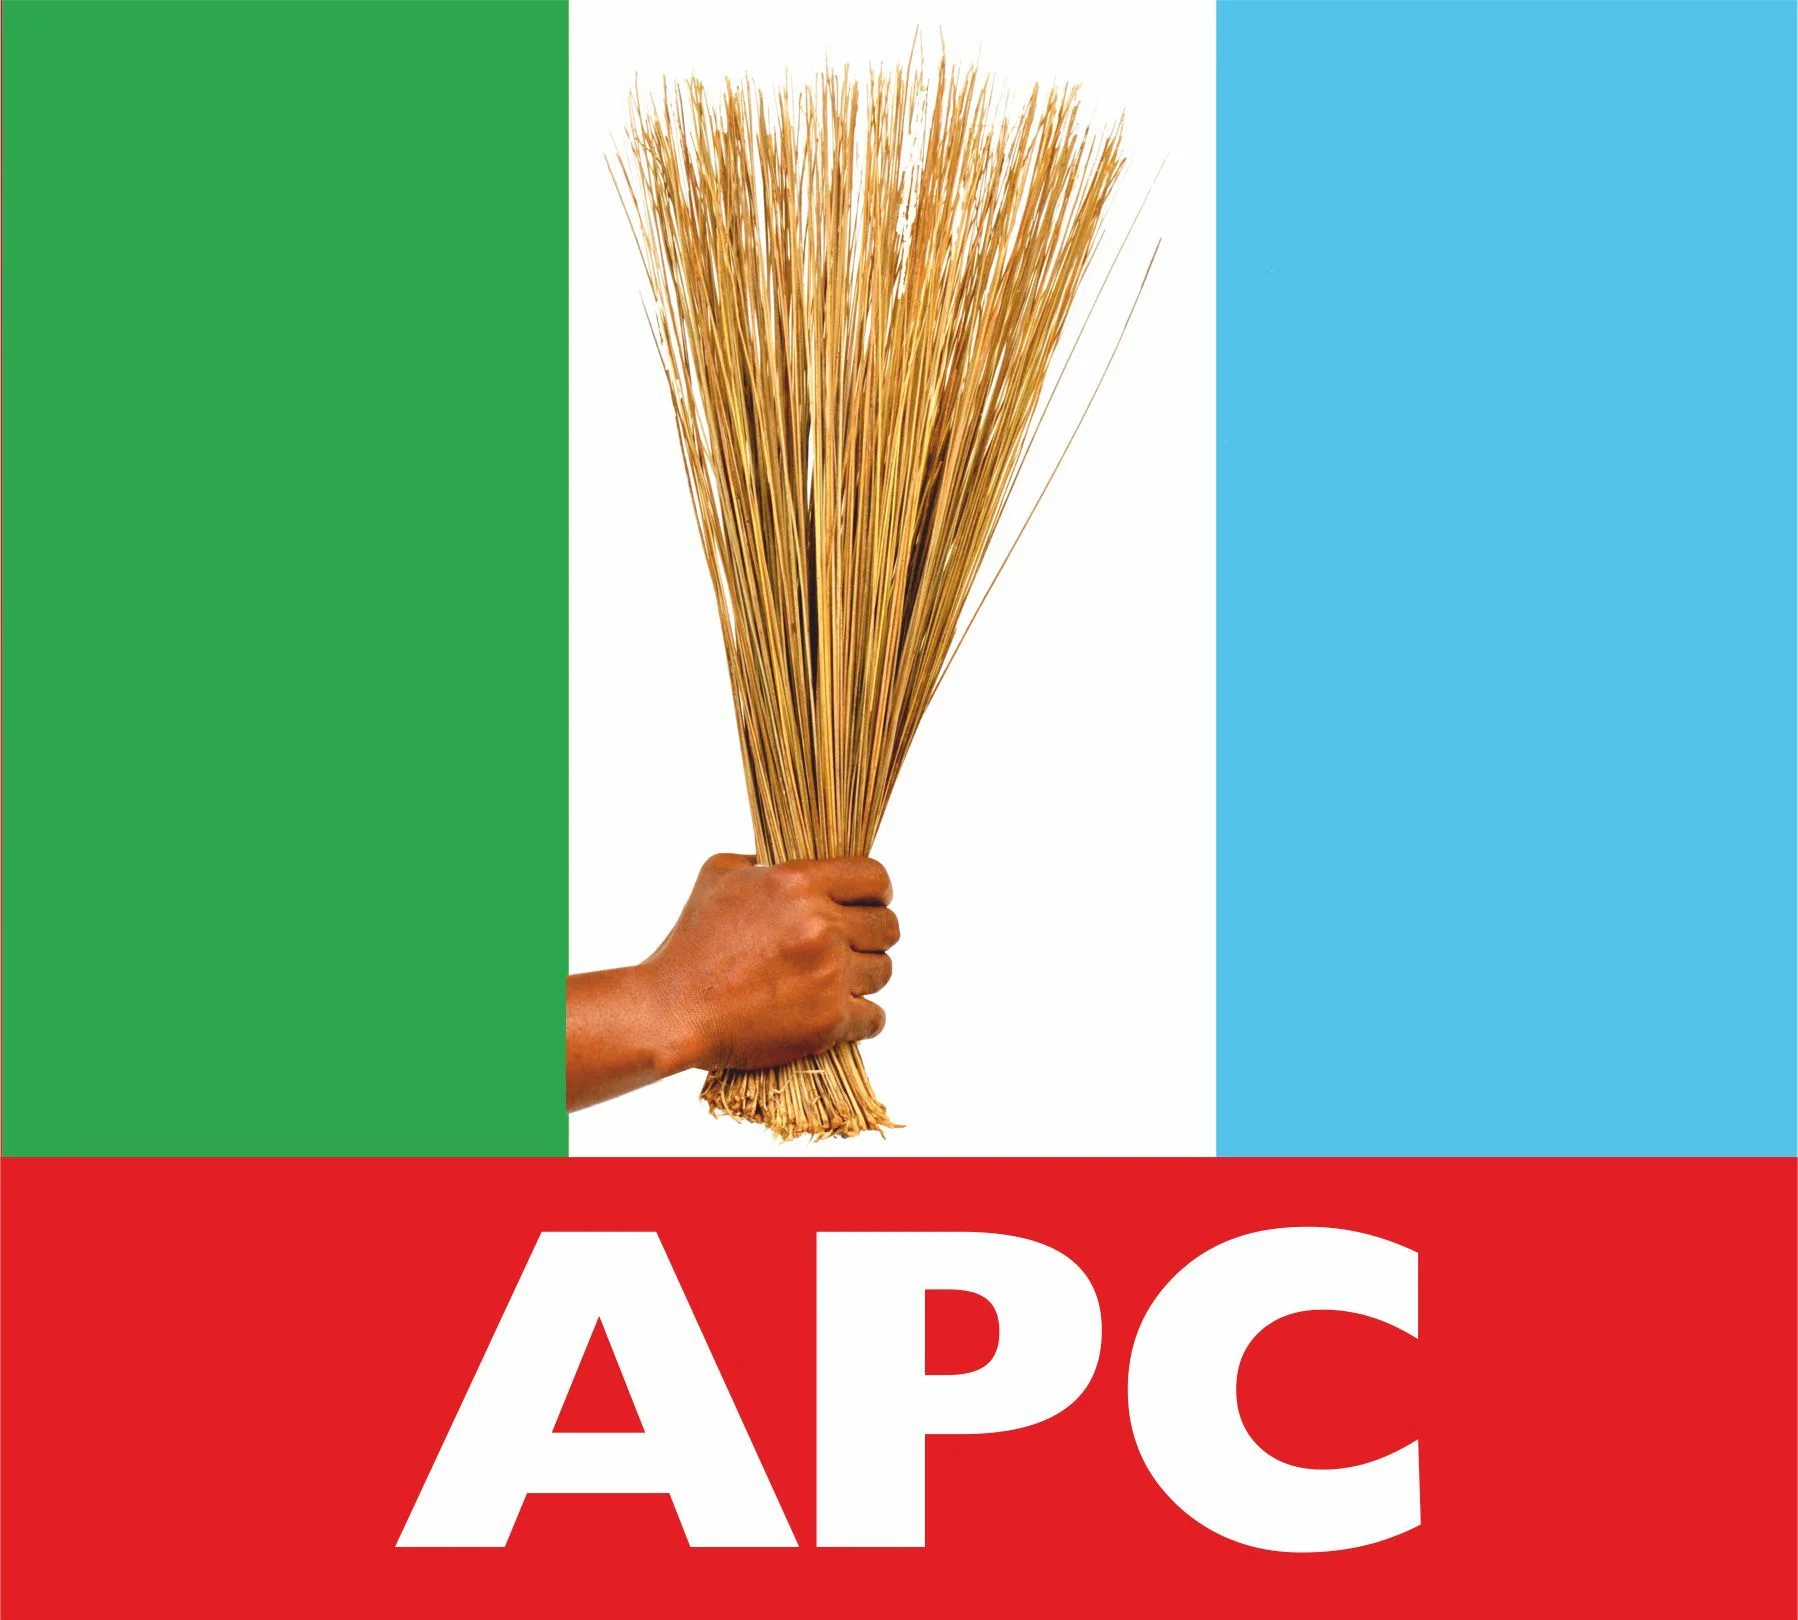 Osun: White Paper on Counterproductive Asset Recovery — APC attacks Adeleke government